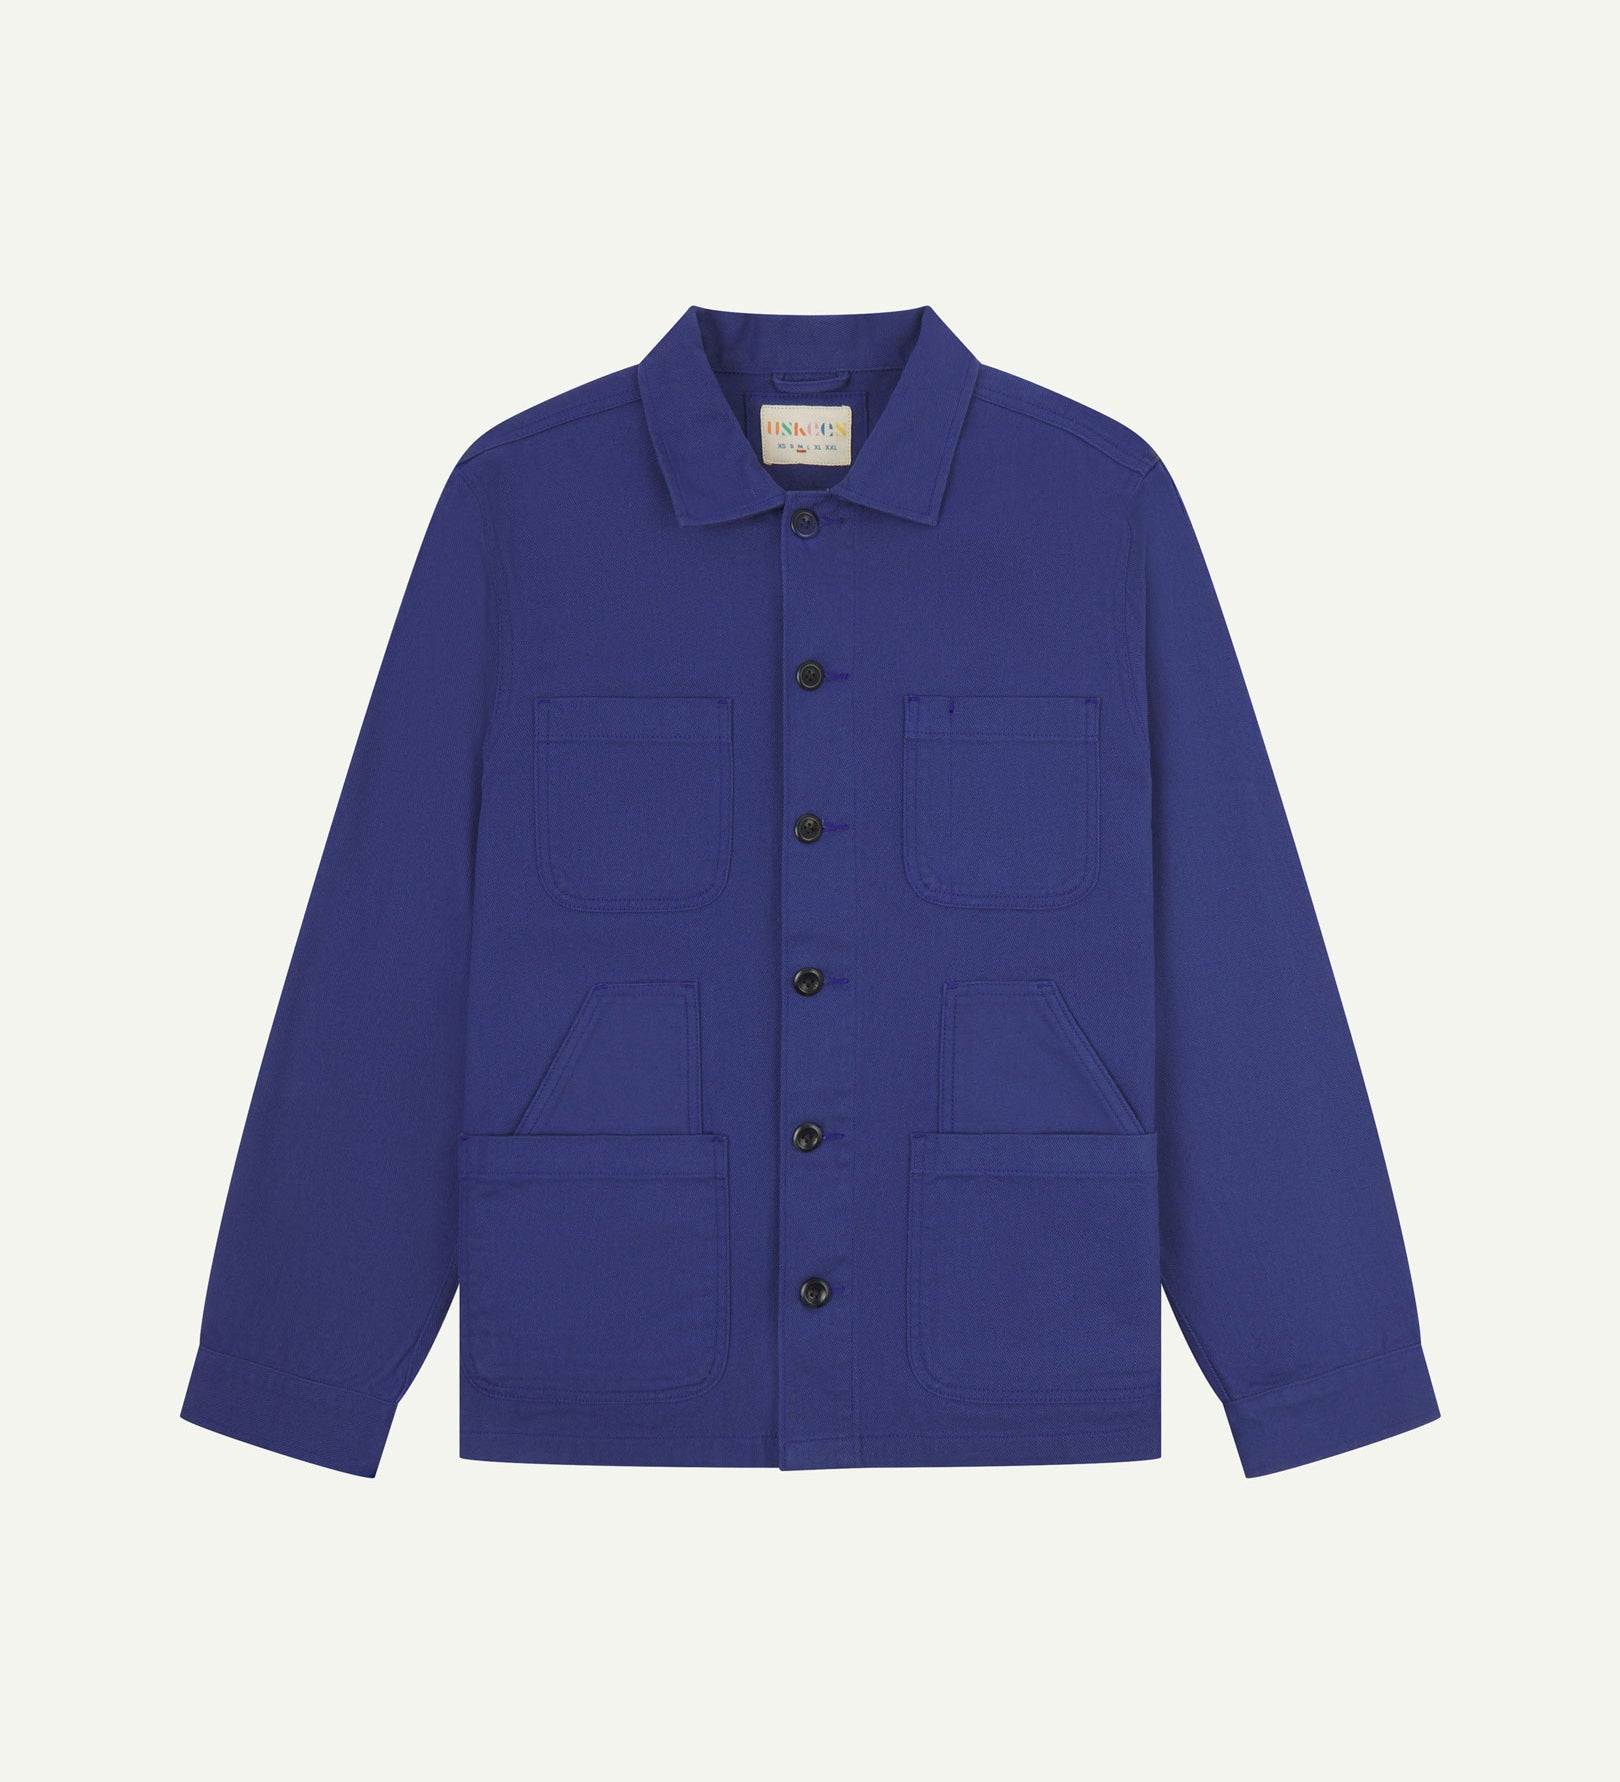 Ultra blue buttoned organic cotton-drill overshirt from Uskees with clear view of layered patch pockets, reinforced elbows and Uskees branding label.